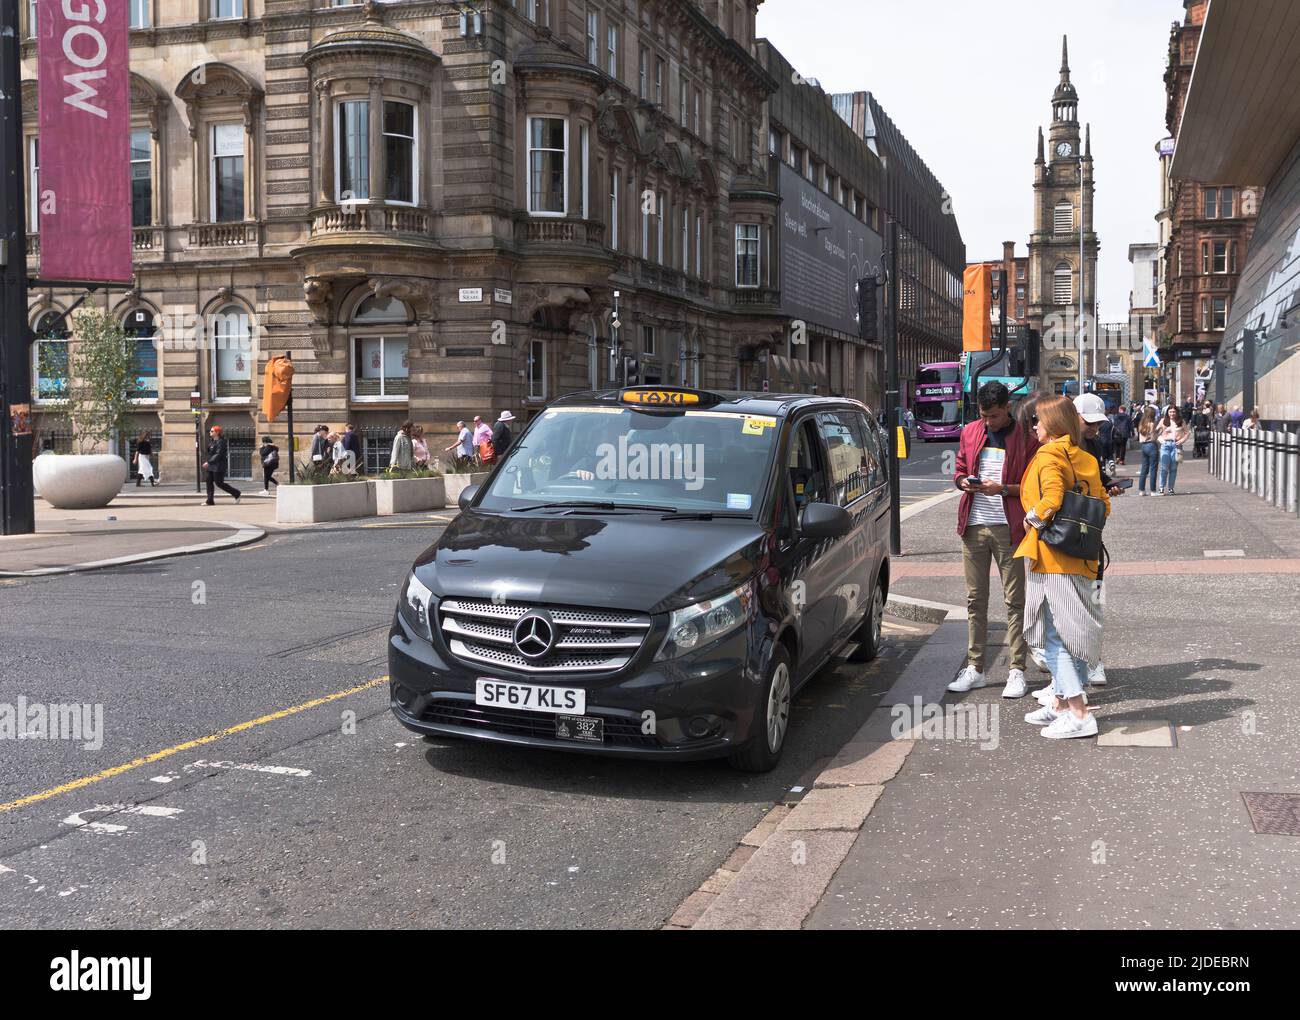 dh Taxis GEORGE STREET GLASGOW Tourists taxi cab people cabs scotland uk Stock Photo